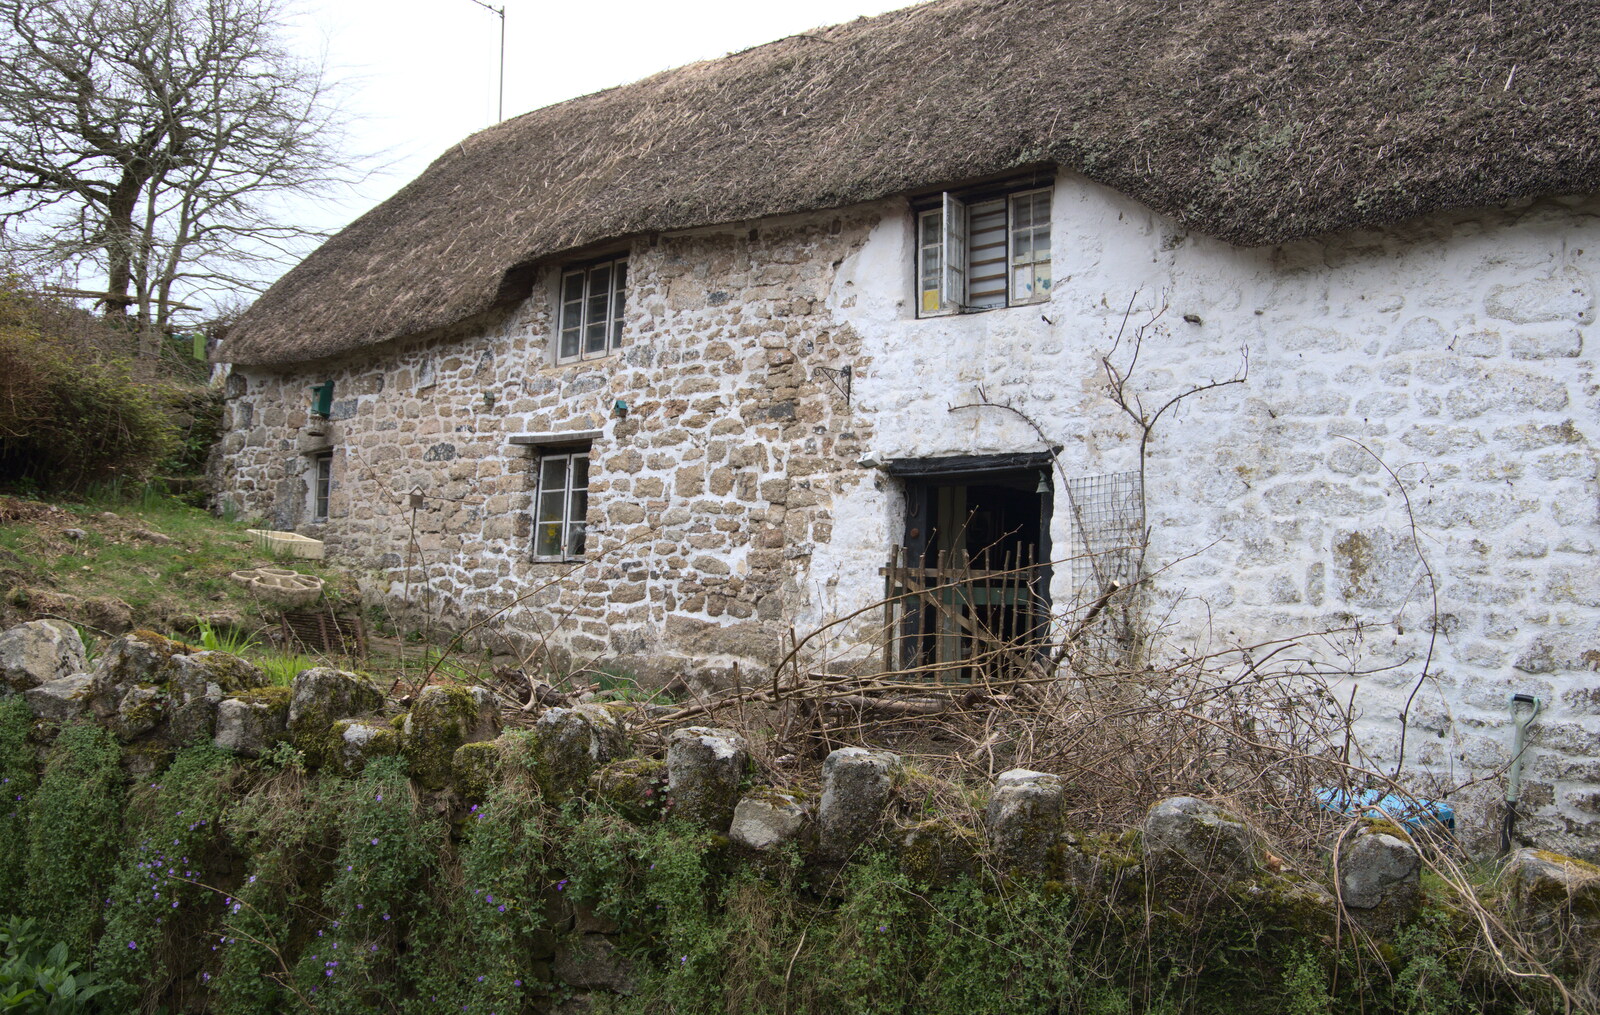 A very traditional cottage from Easter in South Zeal and Moretonhampstead, Devon - 9th April